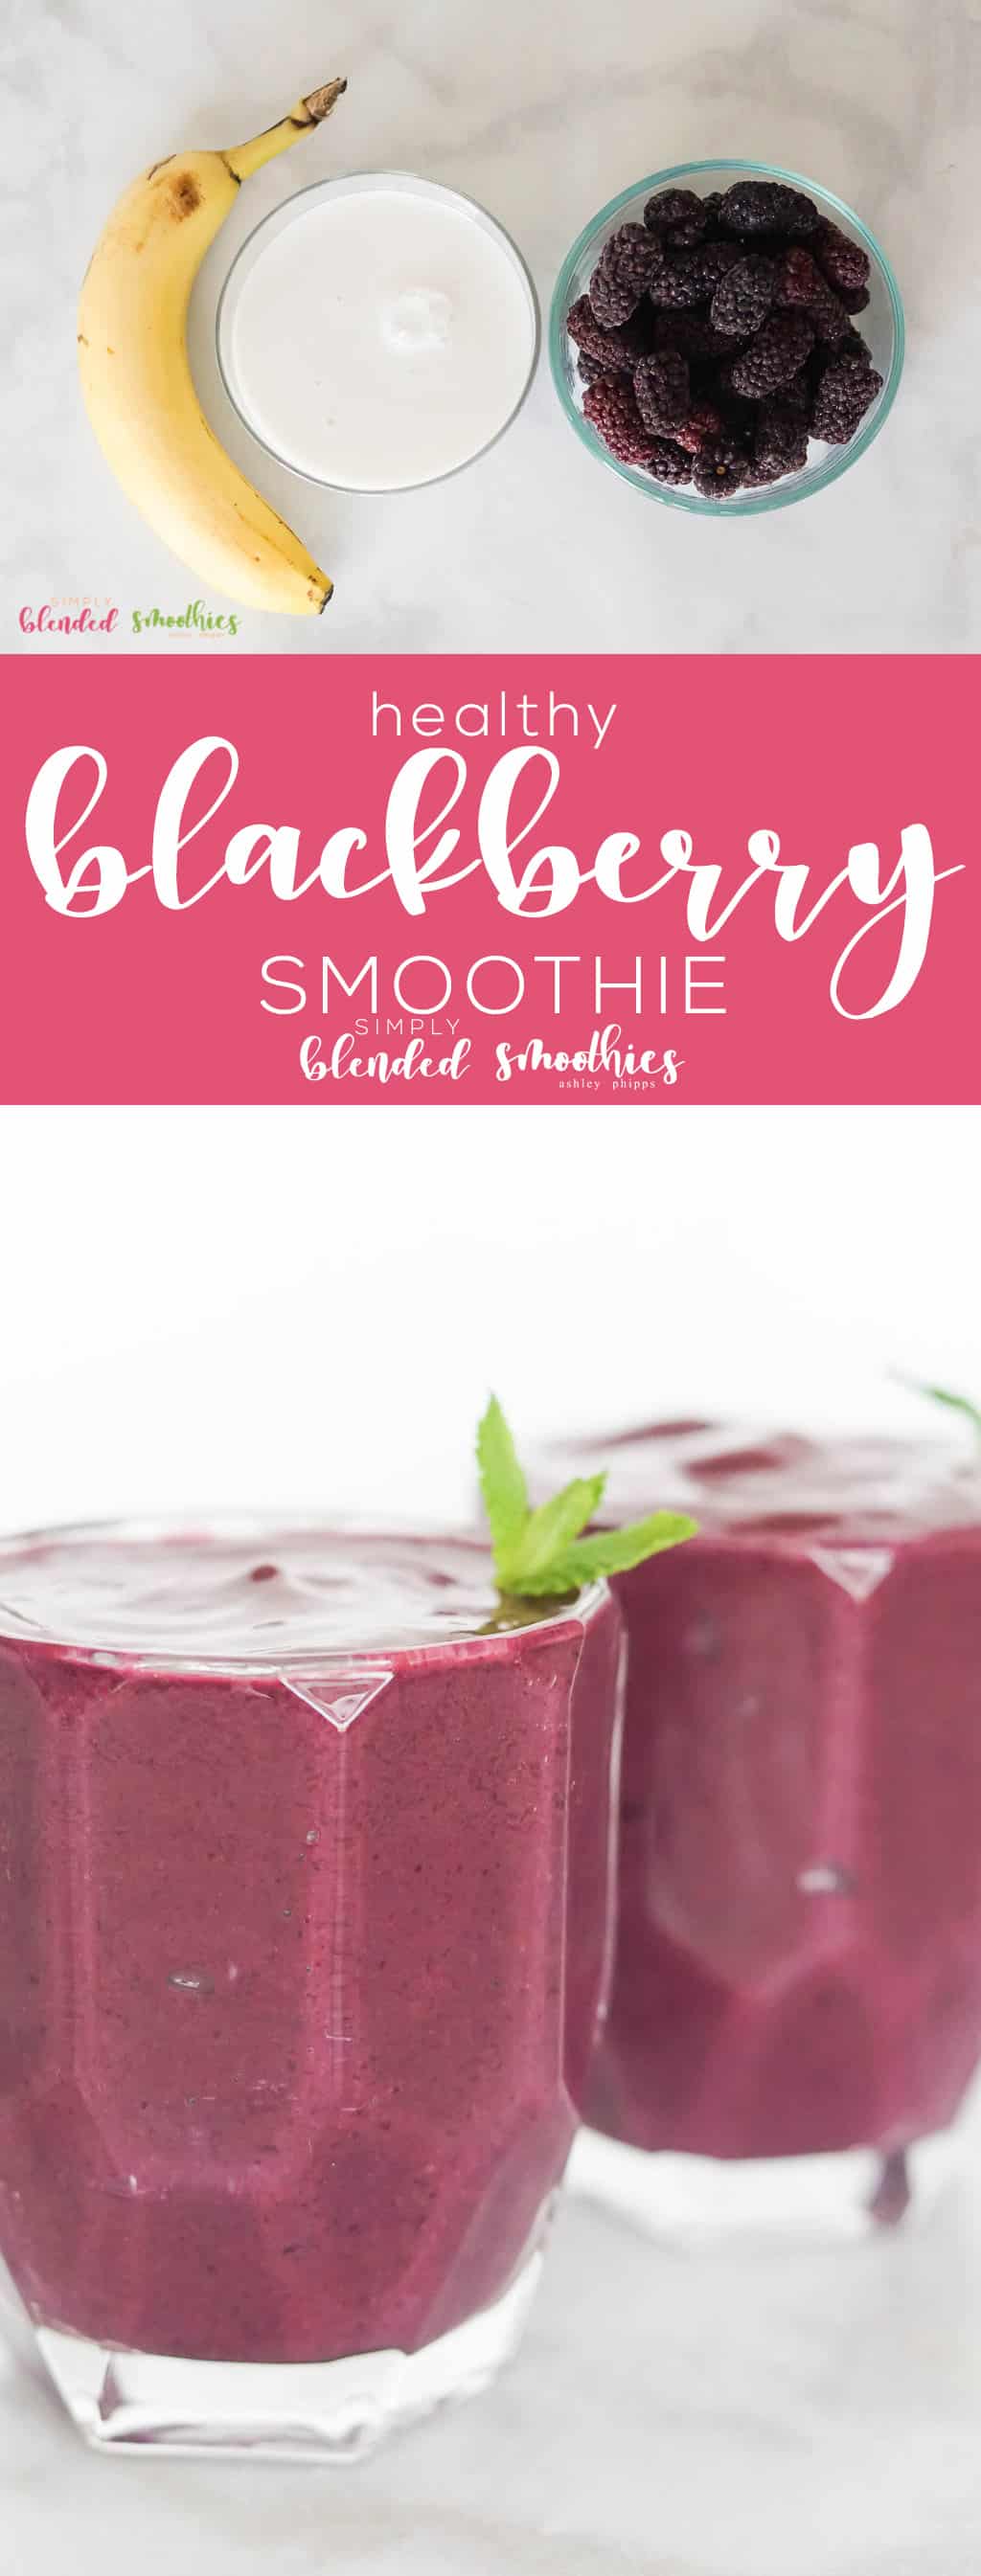 Blackberry Smoothie - This Healthy Blackberry Smoothie Is A Delicious And Filling Way To Drink Your Fruits - It Is Perfect For Breakfast Brunch Or An Afternoon Snack